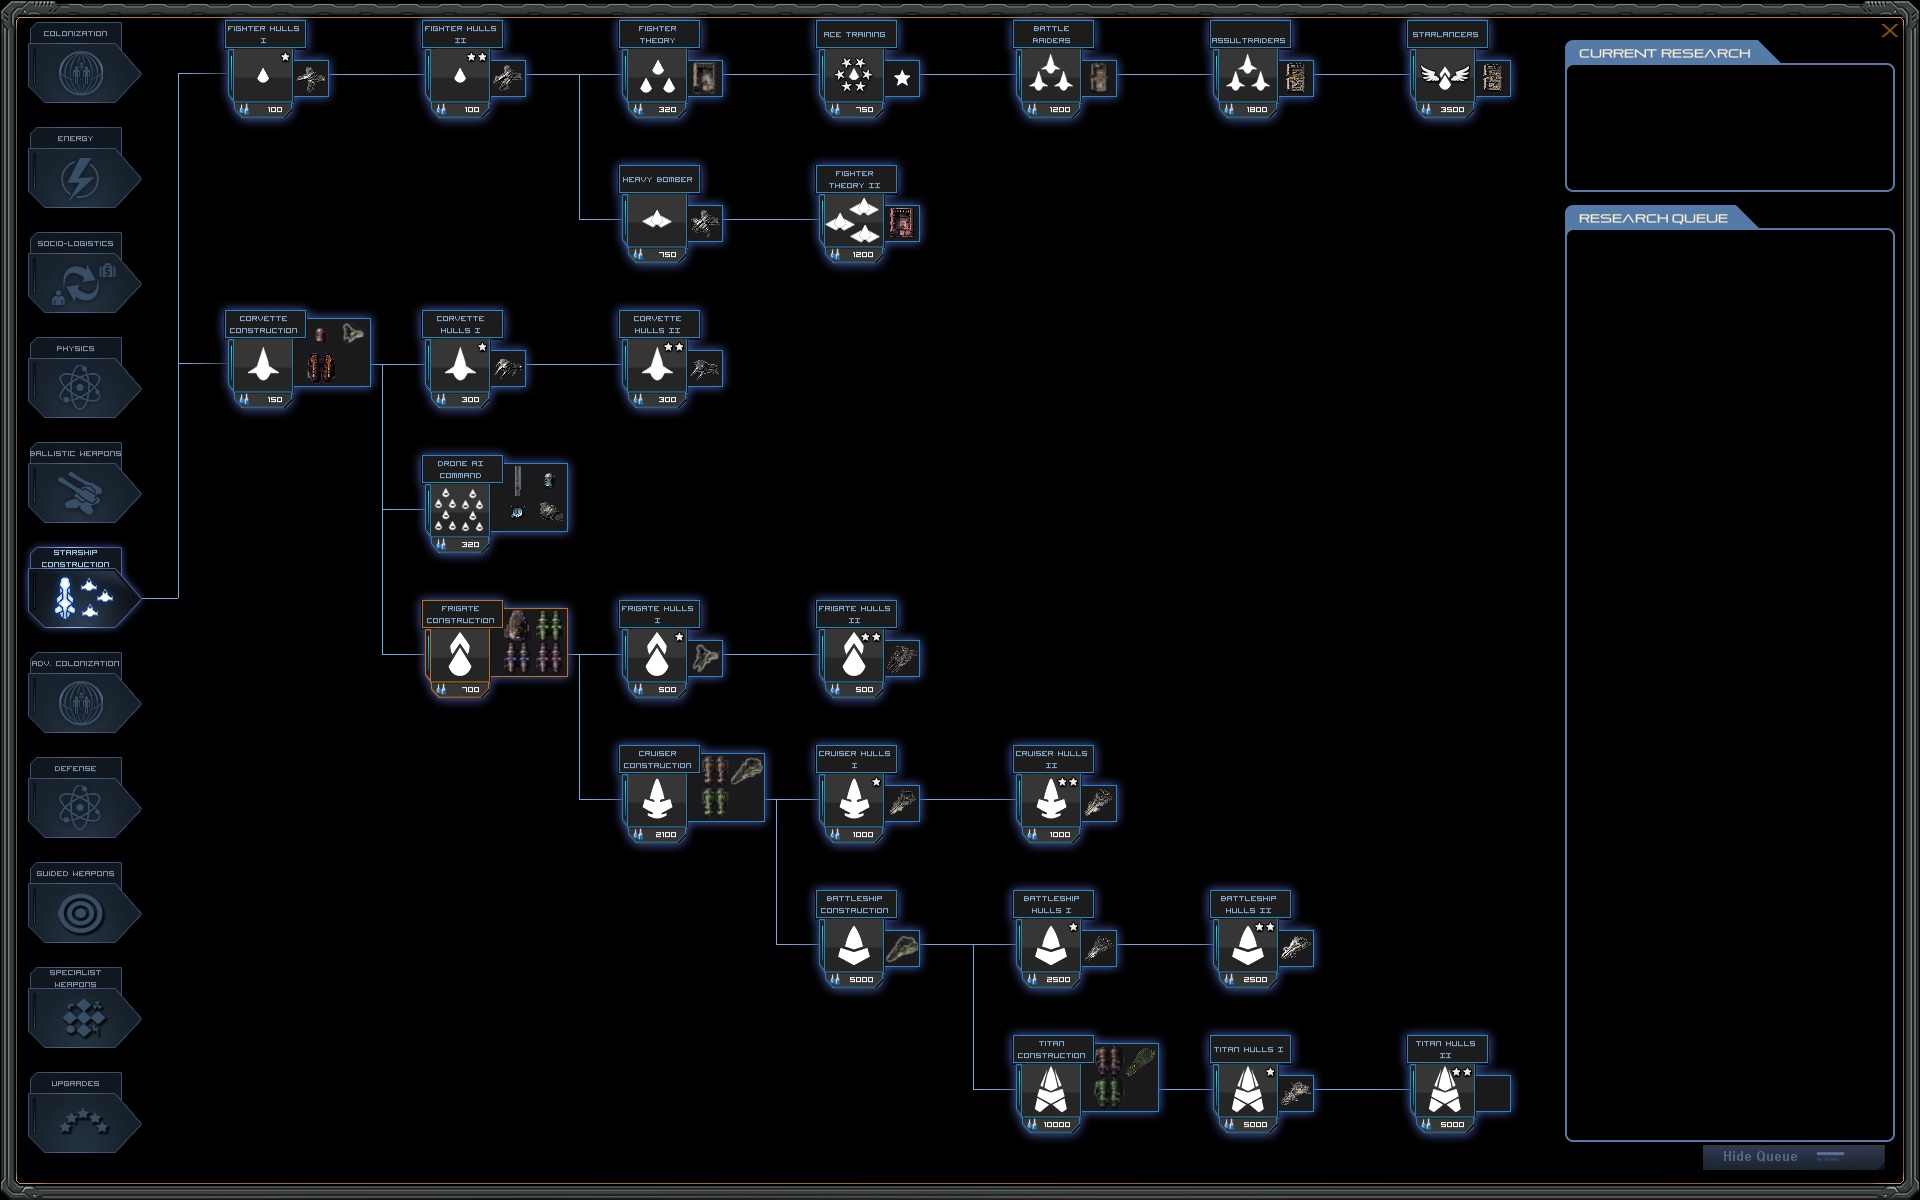 stardrive 2 research tree